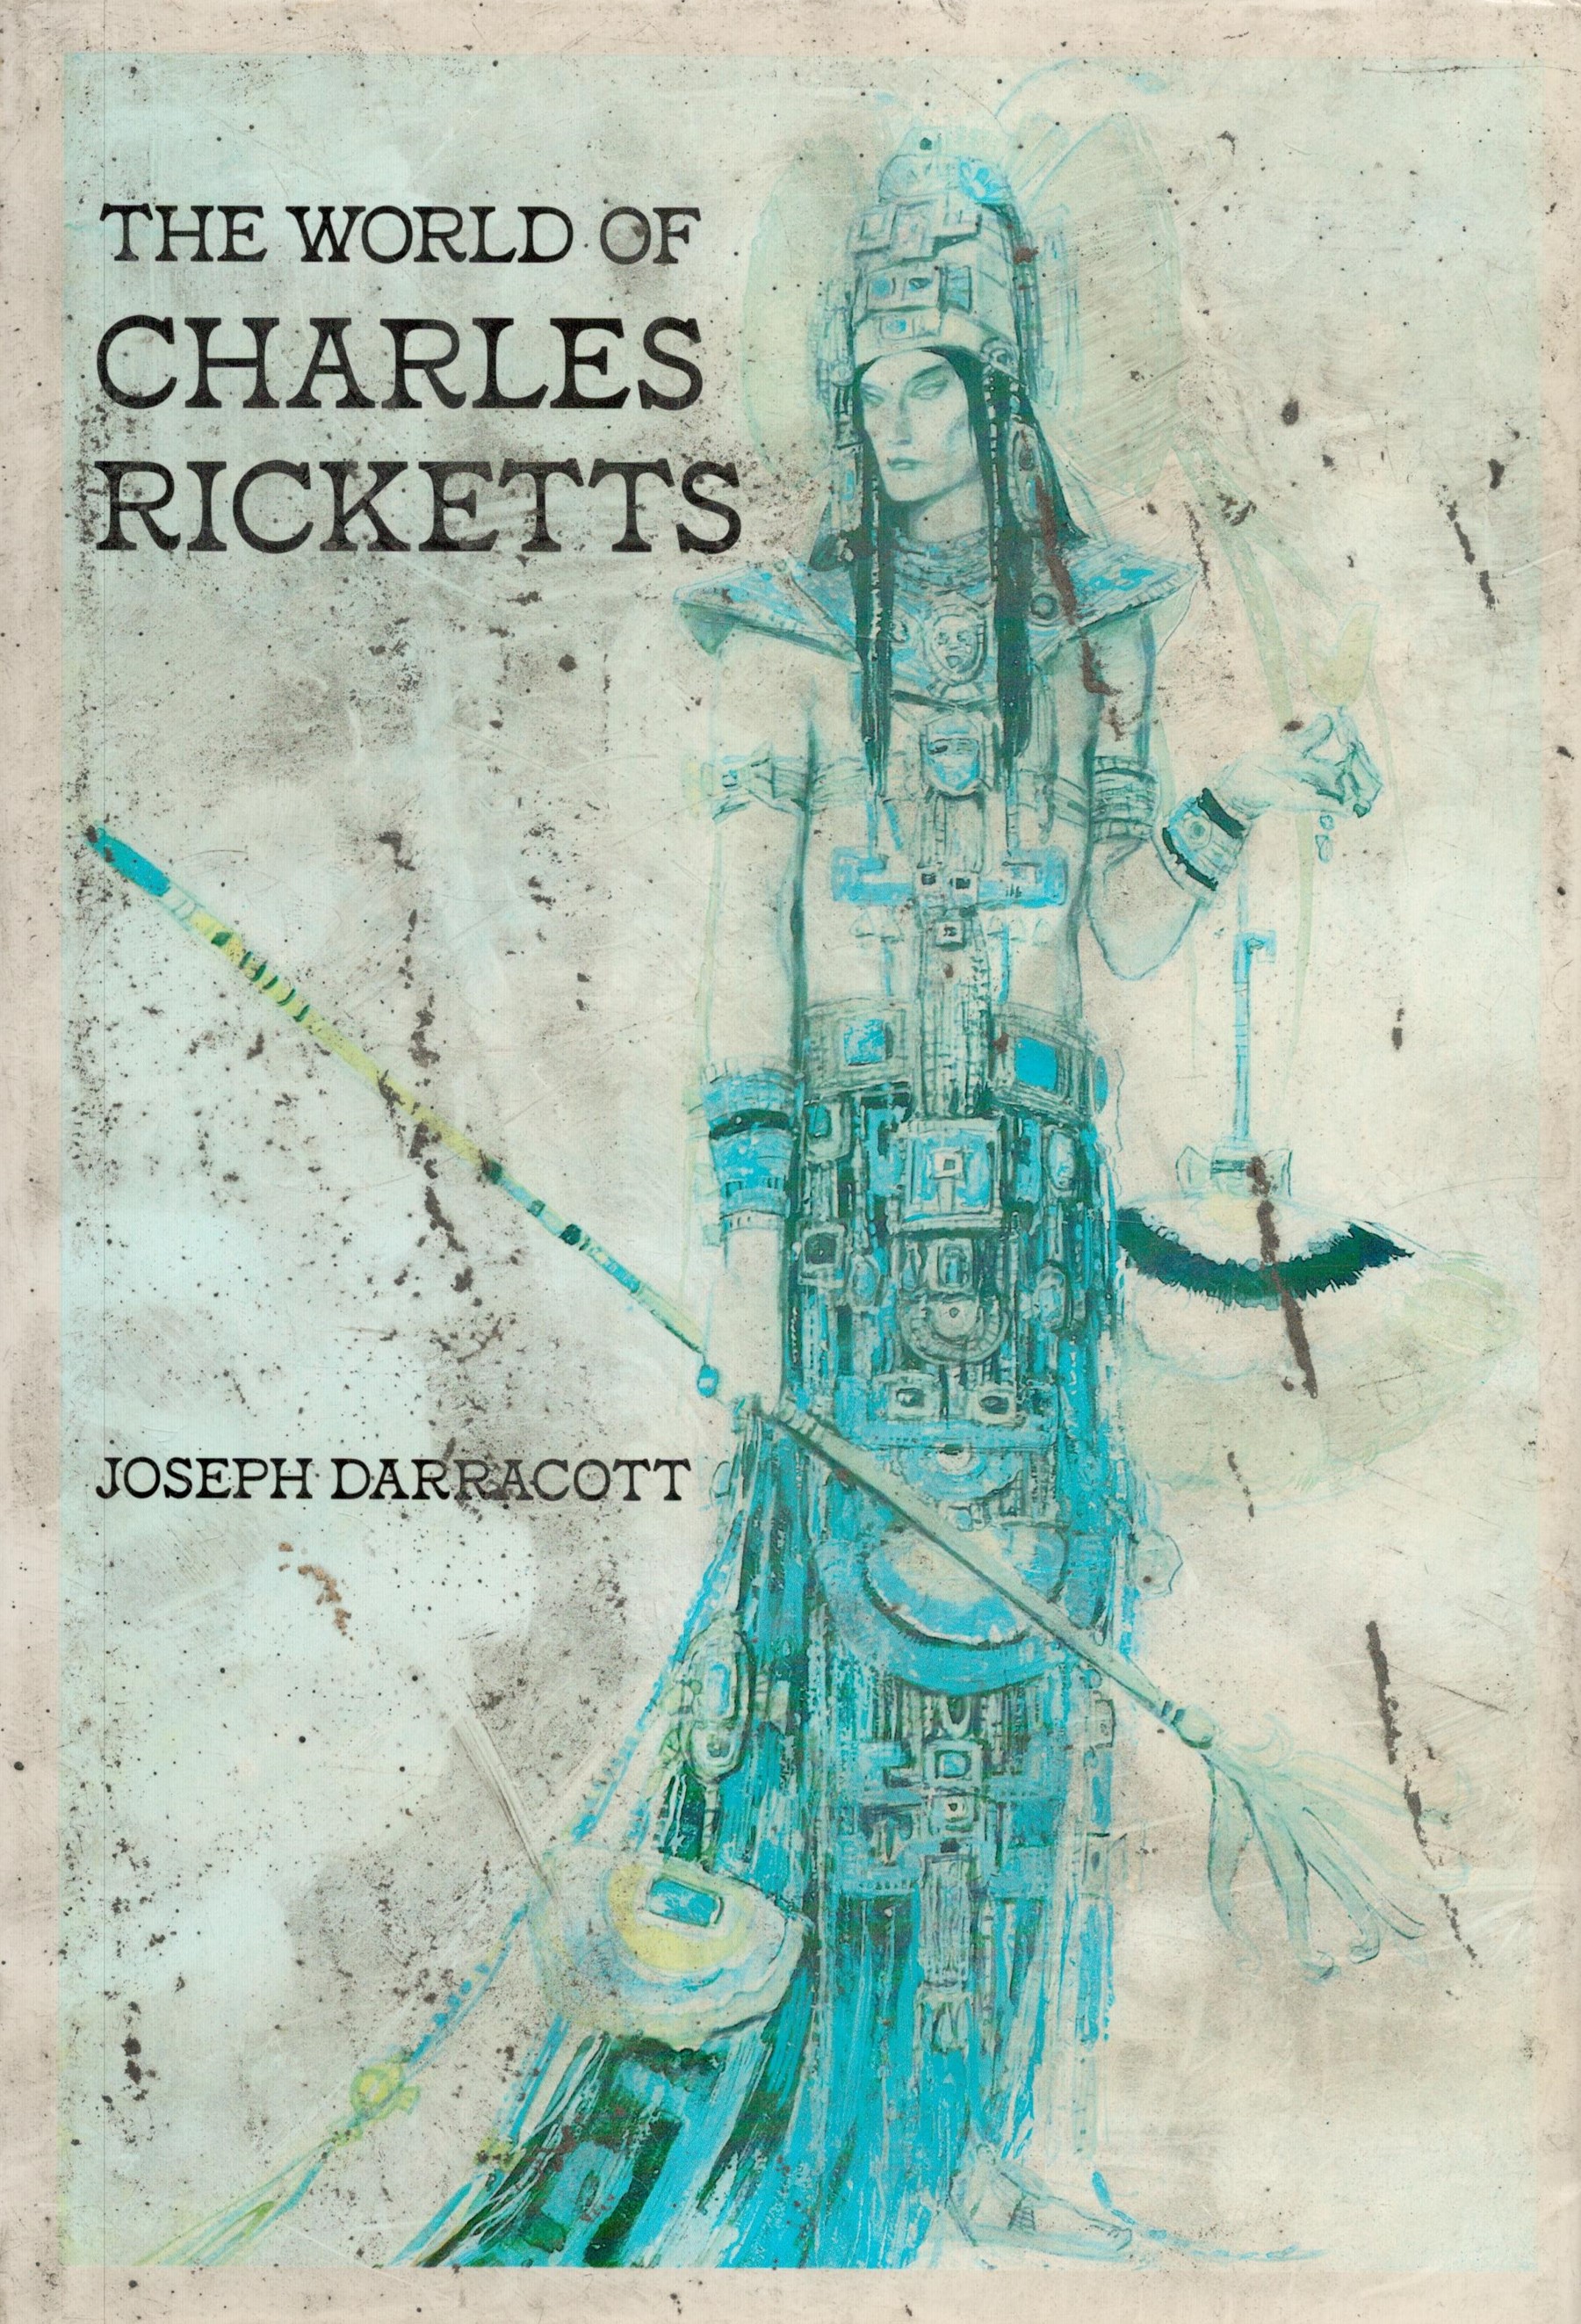 The World of Charles Ricketts by Joseph Darracott Hardback Book 1980 First U. S. A. Edition